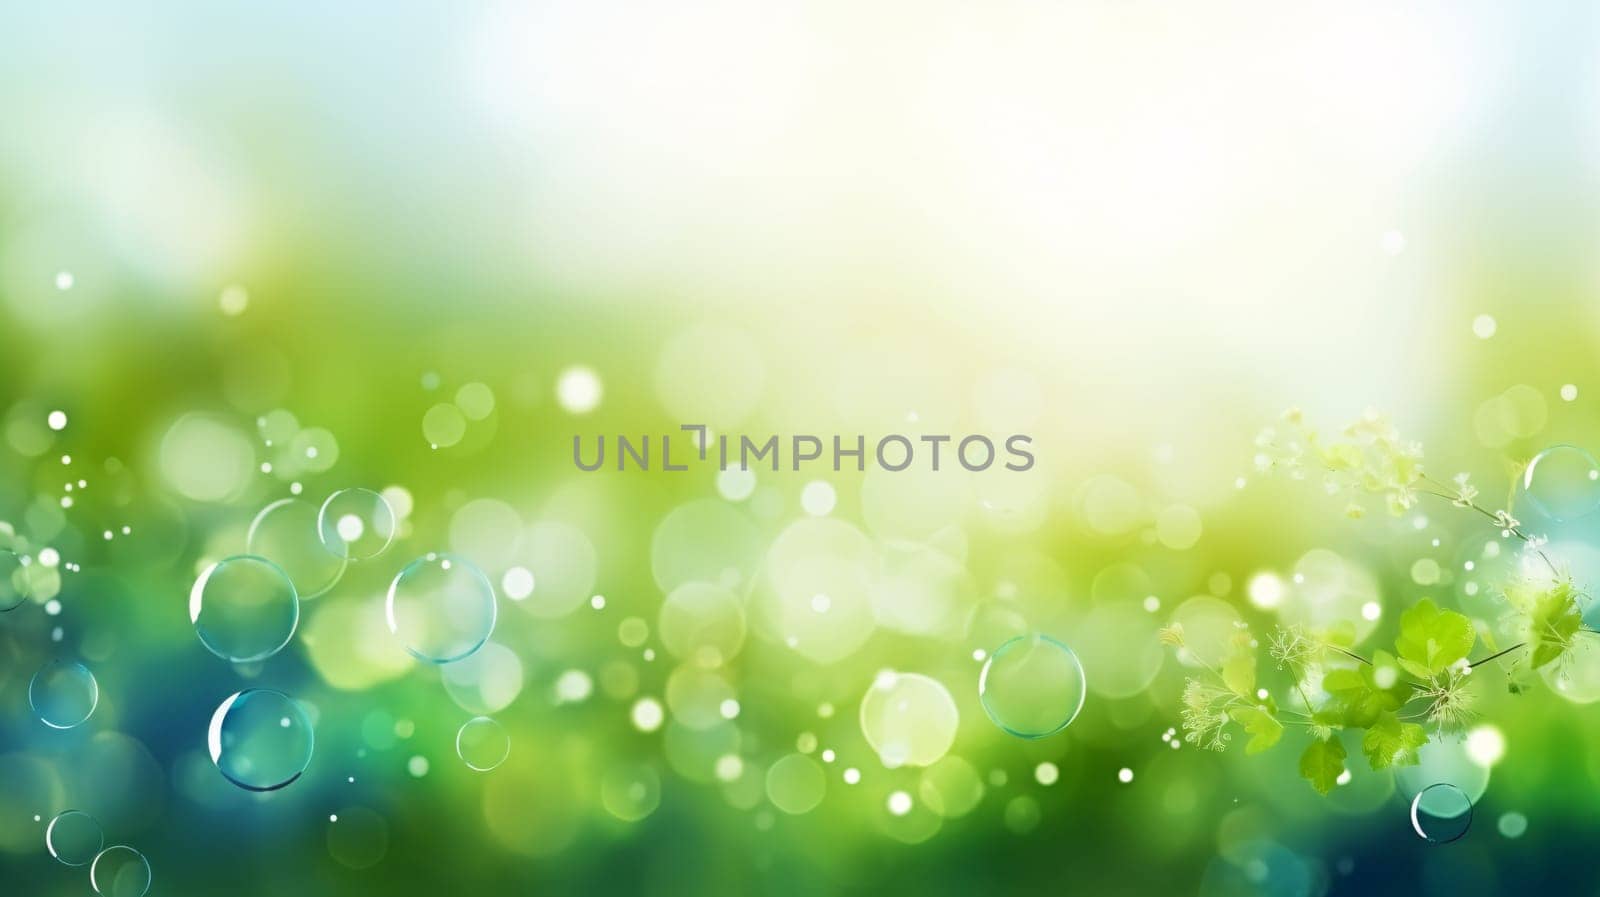 Bubbles in the air with green and white bokeh - Spring season concept by chrisroll